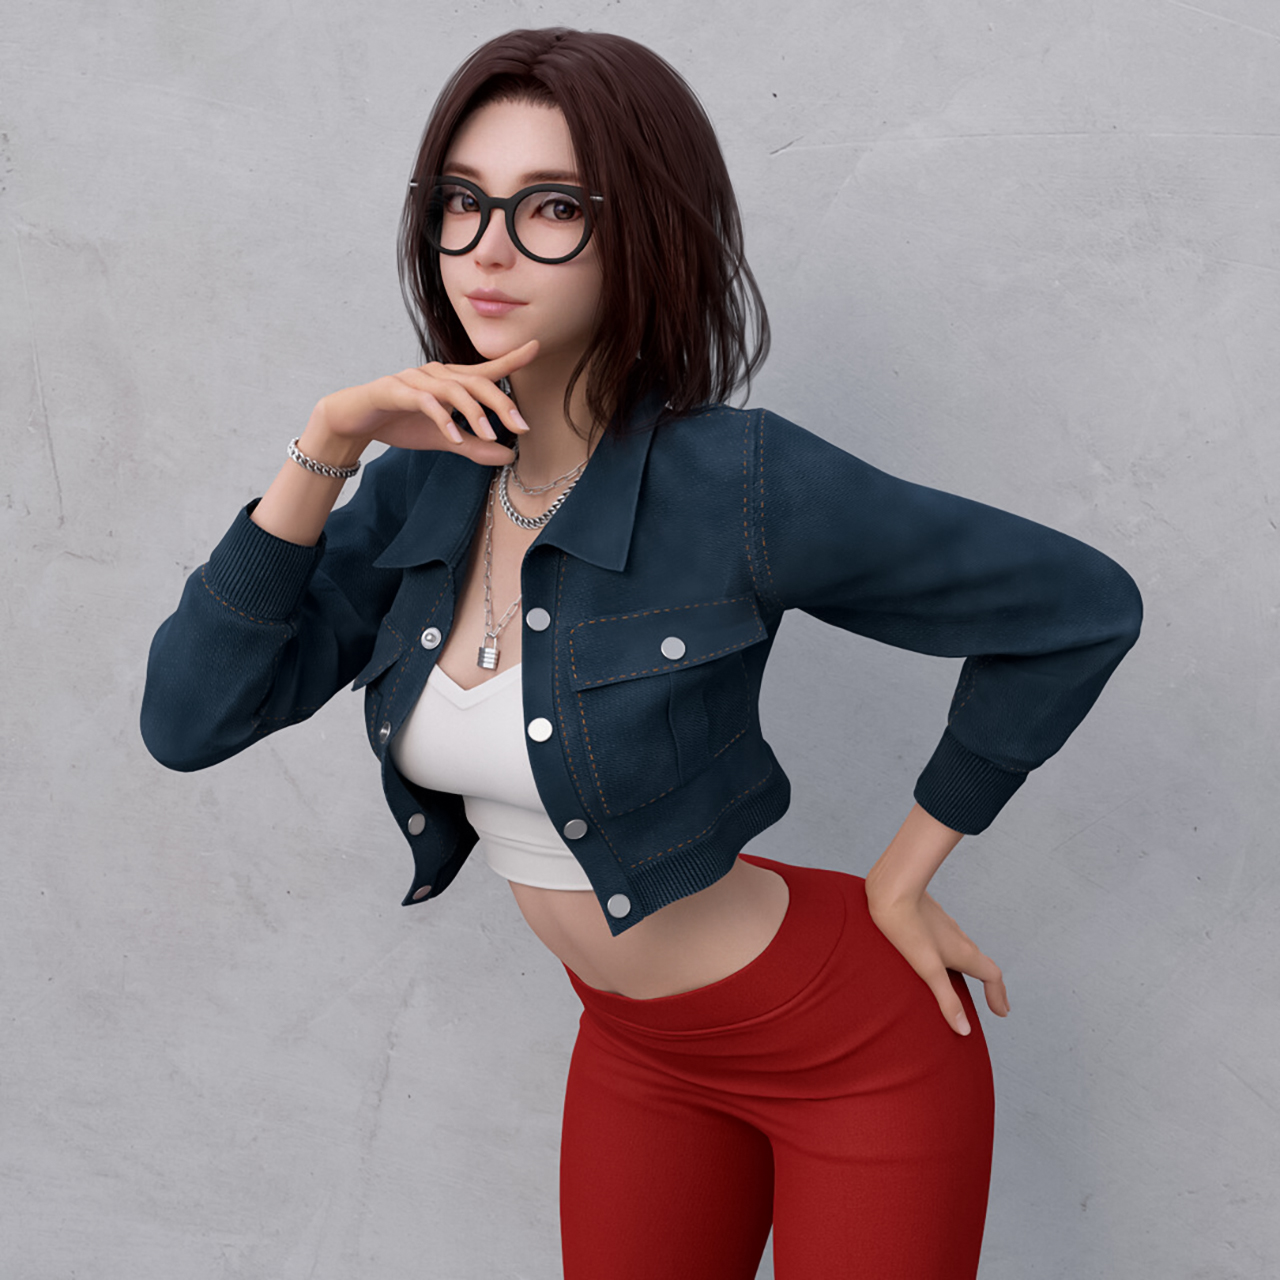 General 1280x1280 Shin JeongHo CGI women brunette glasses jacket red clothing pants open clothes jewelry silver simple background